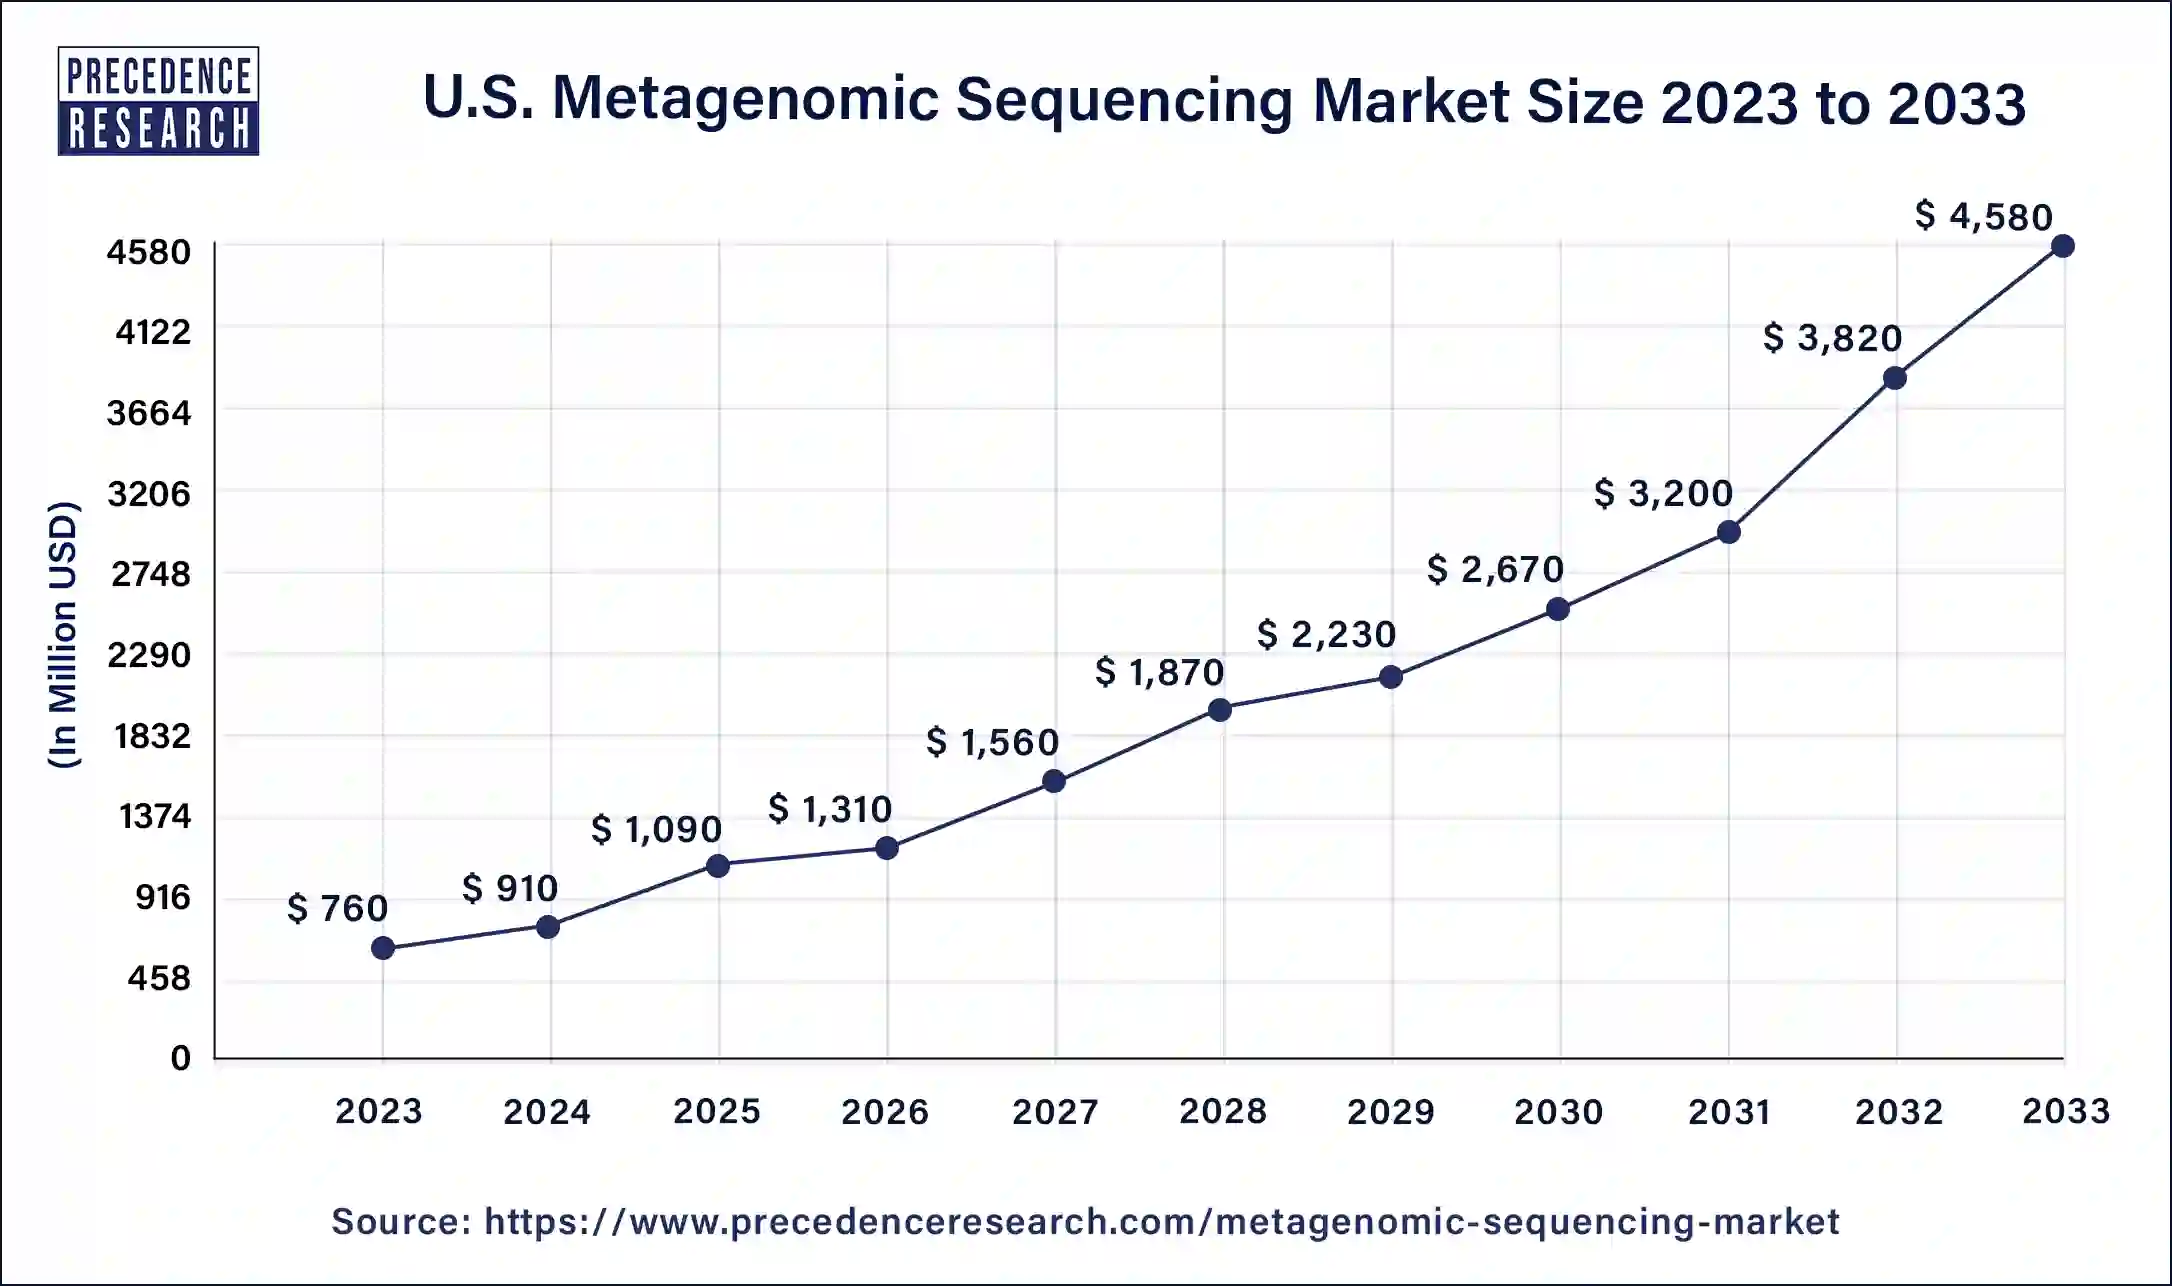 U.S. Metagenomic Sequencing Market Size 2024 to 2033